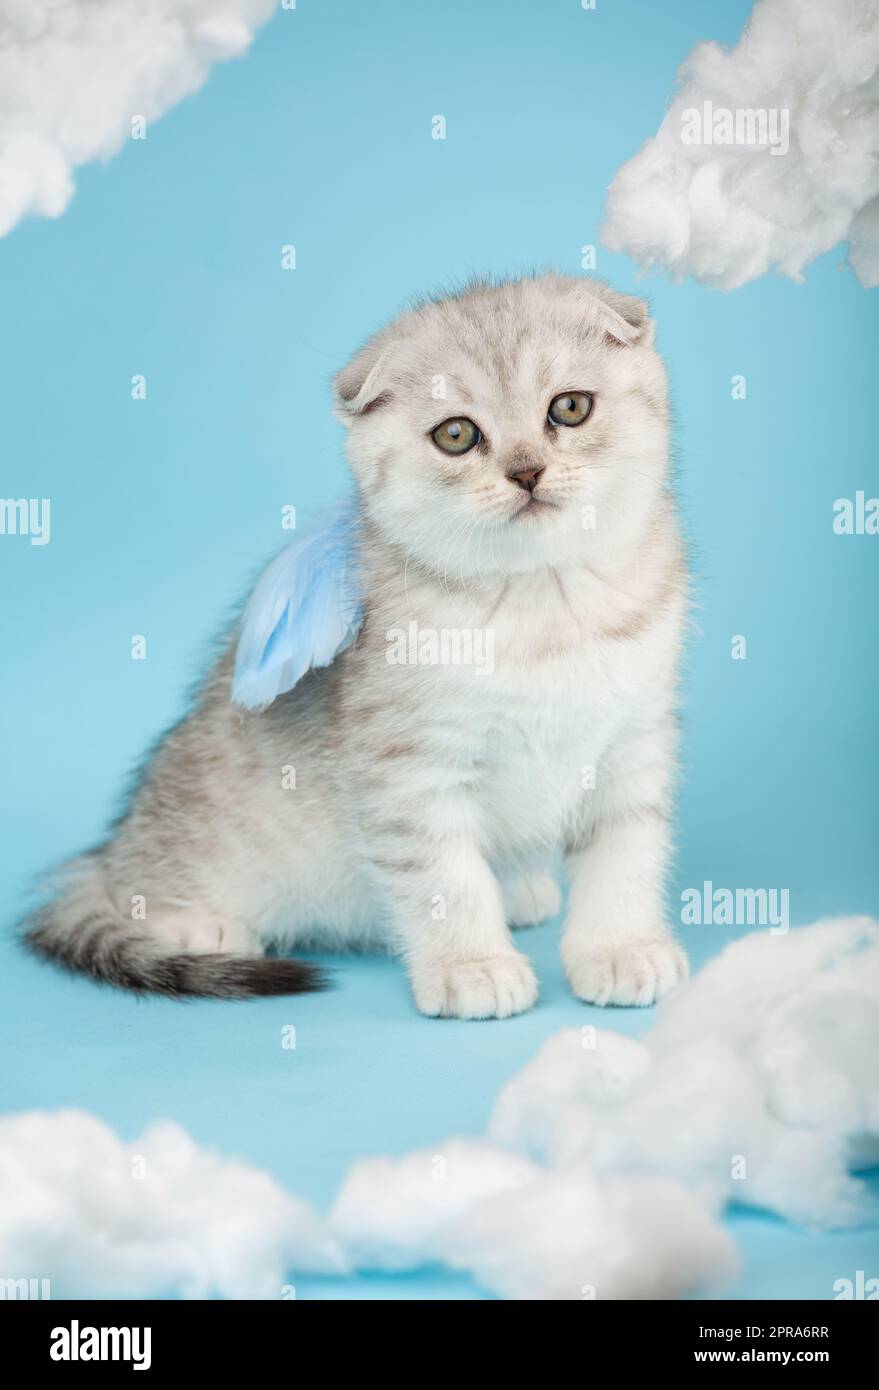 Portrait of a Scottish kitten with a funny facial expression who wears angel wings on his back. Stock Photo